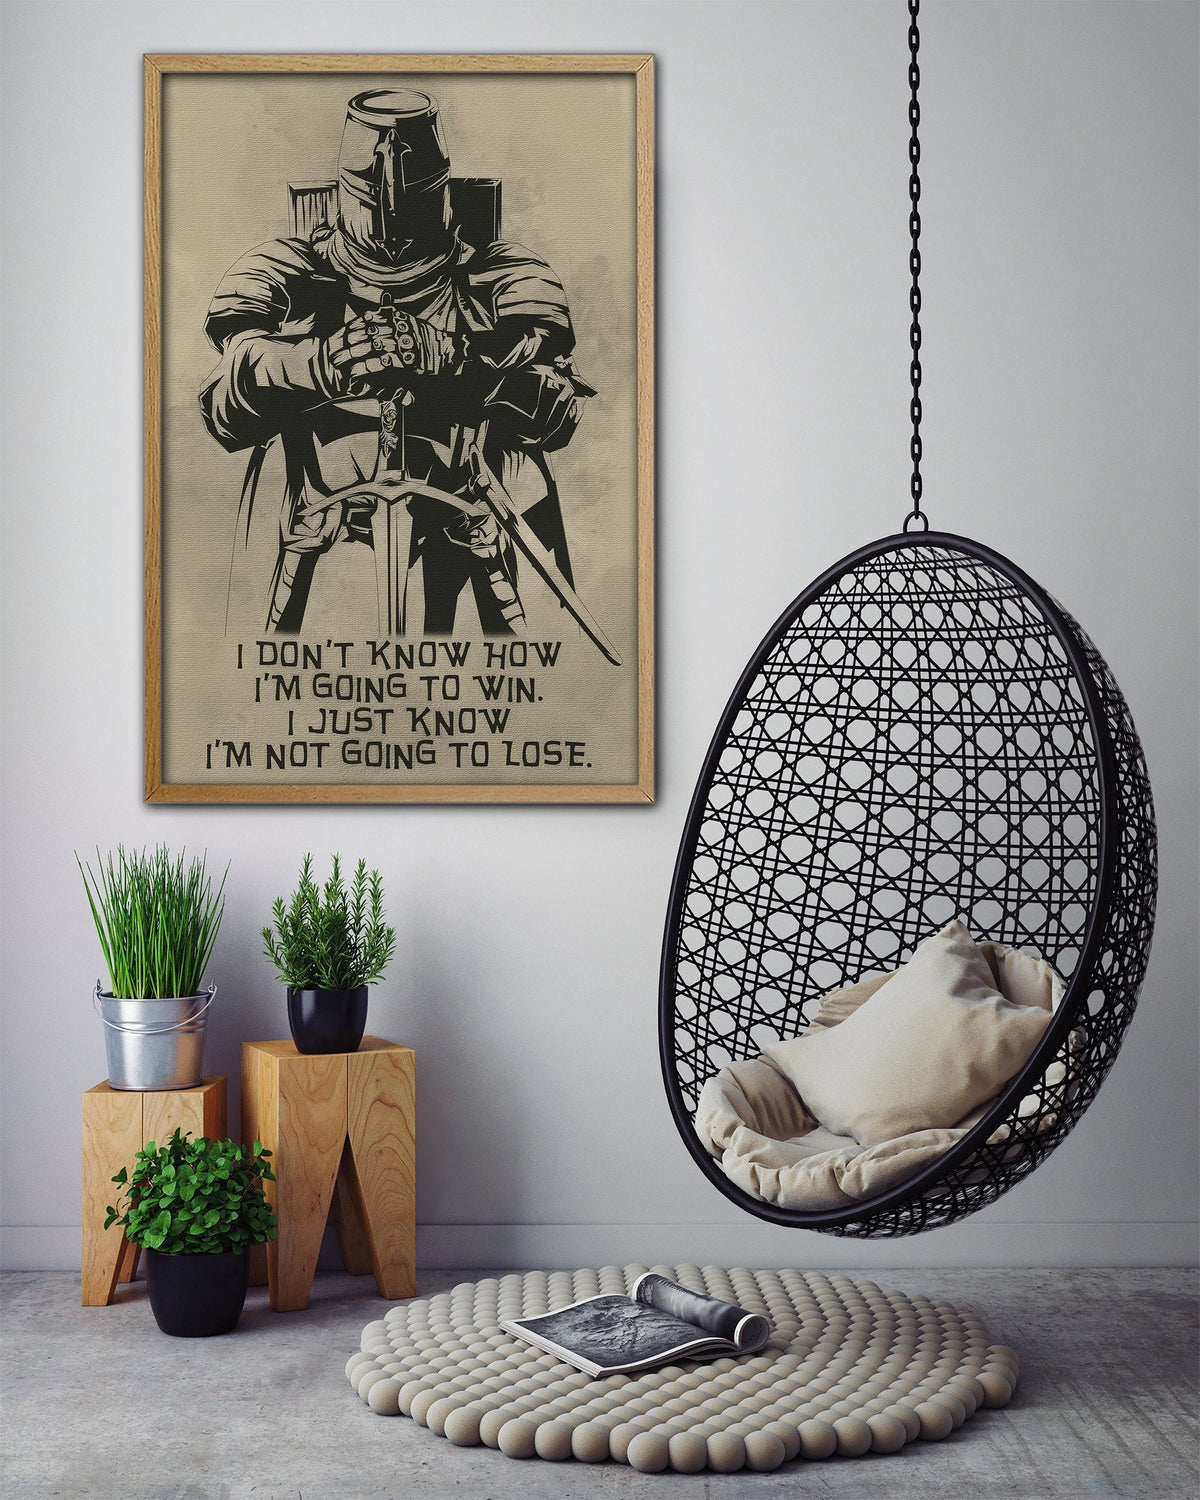 KT013 - I'm Not Going To Lose - English - Knight Templar Poster